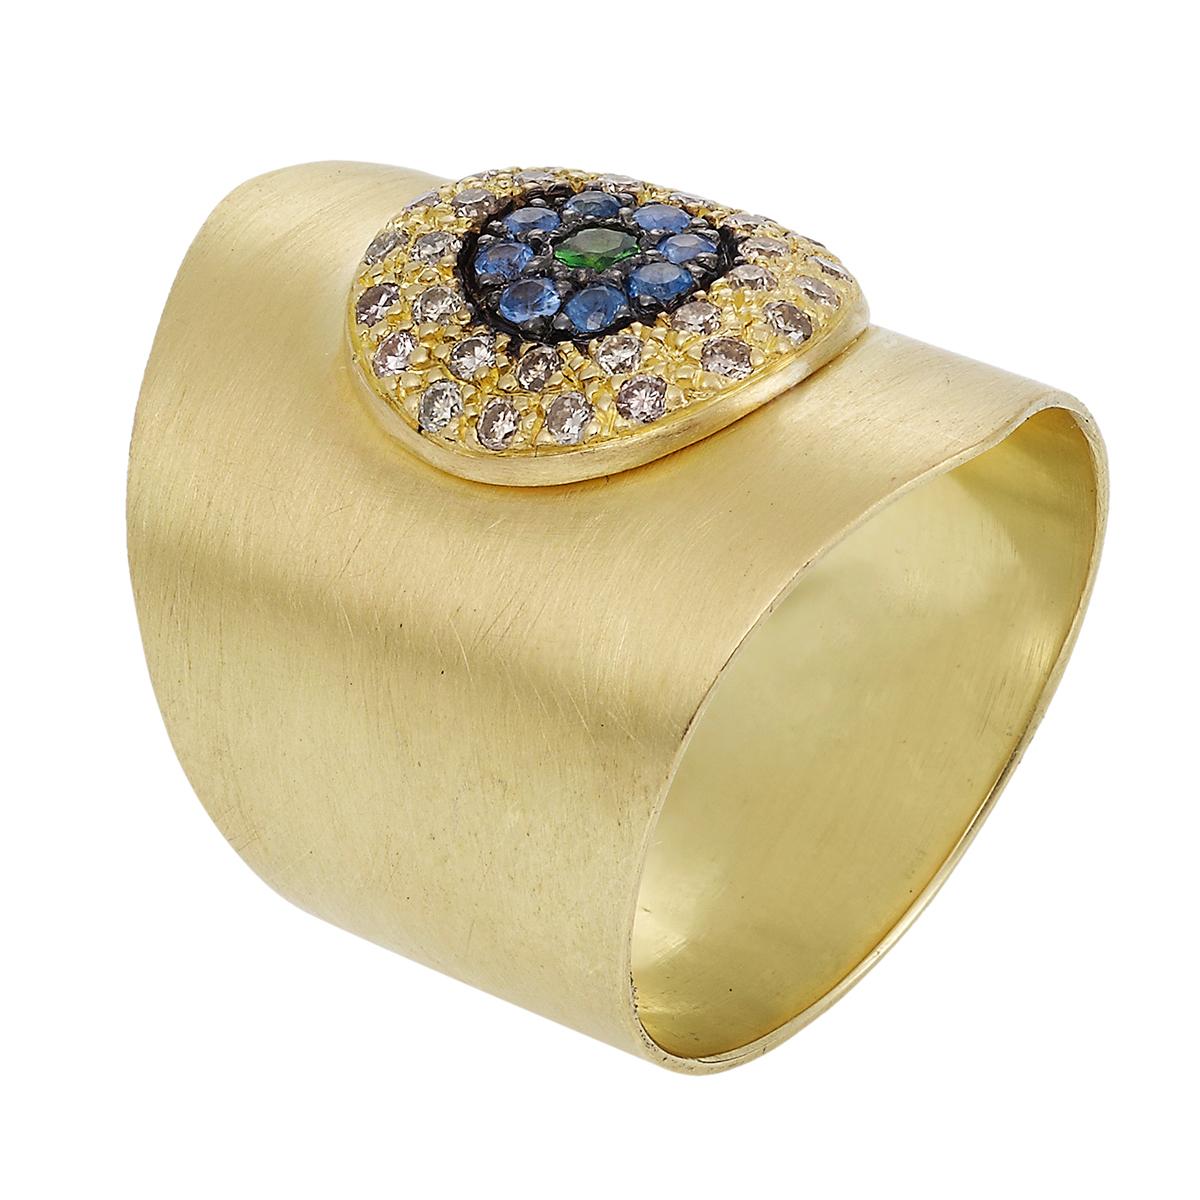 This satin-finished 18k yellow gold wide shield ring is embellished at the face with a pavé gemstone 